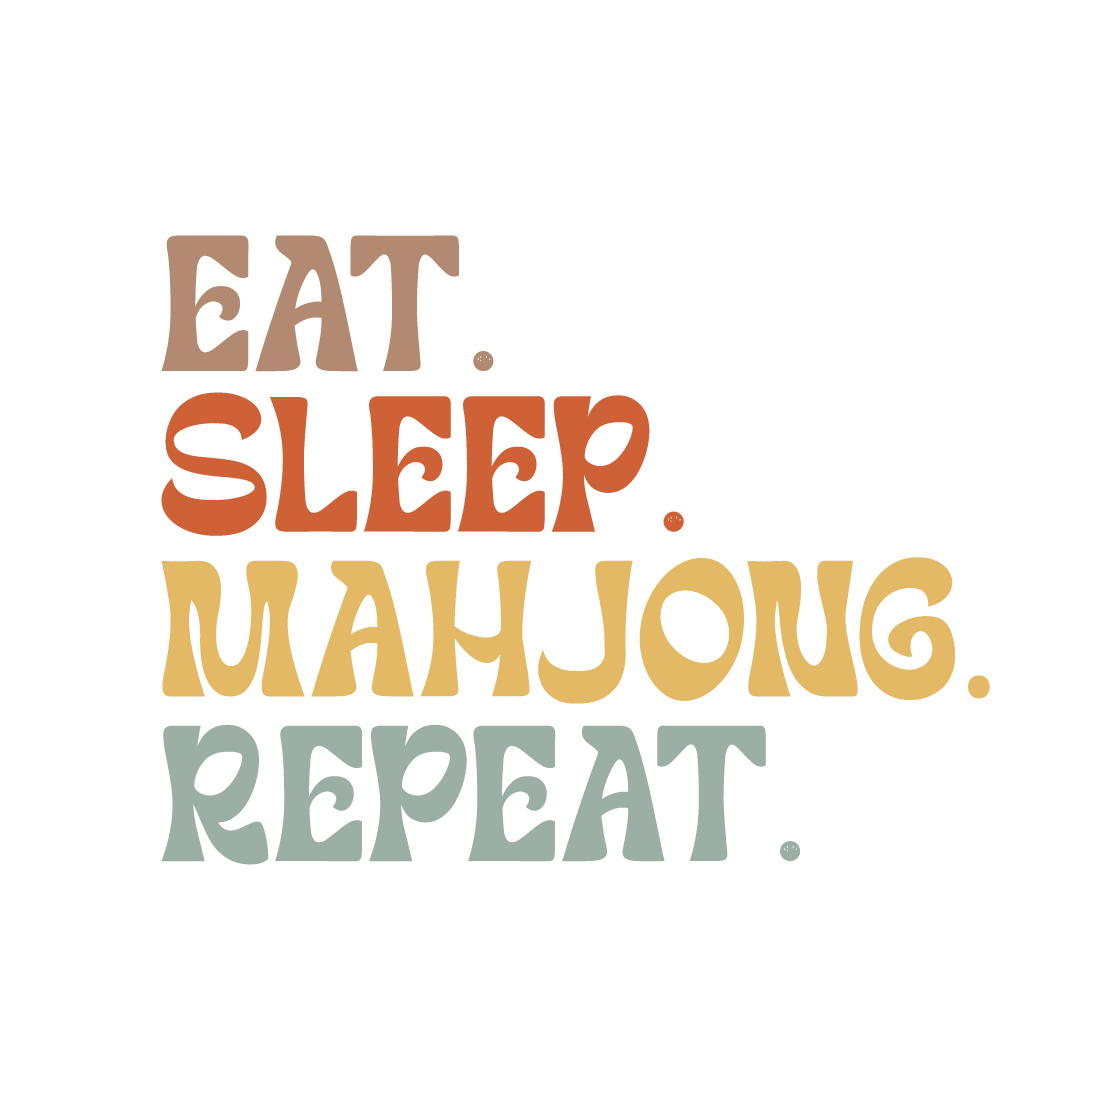 Eat Sleep Mahjong Repeat indoor game typography design for t-shirts, cards, frame artwork, phone cases, bags, mugs, stickers, tumblers, print, etc preview image.